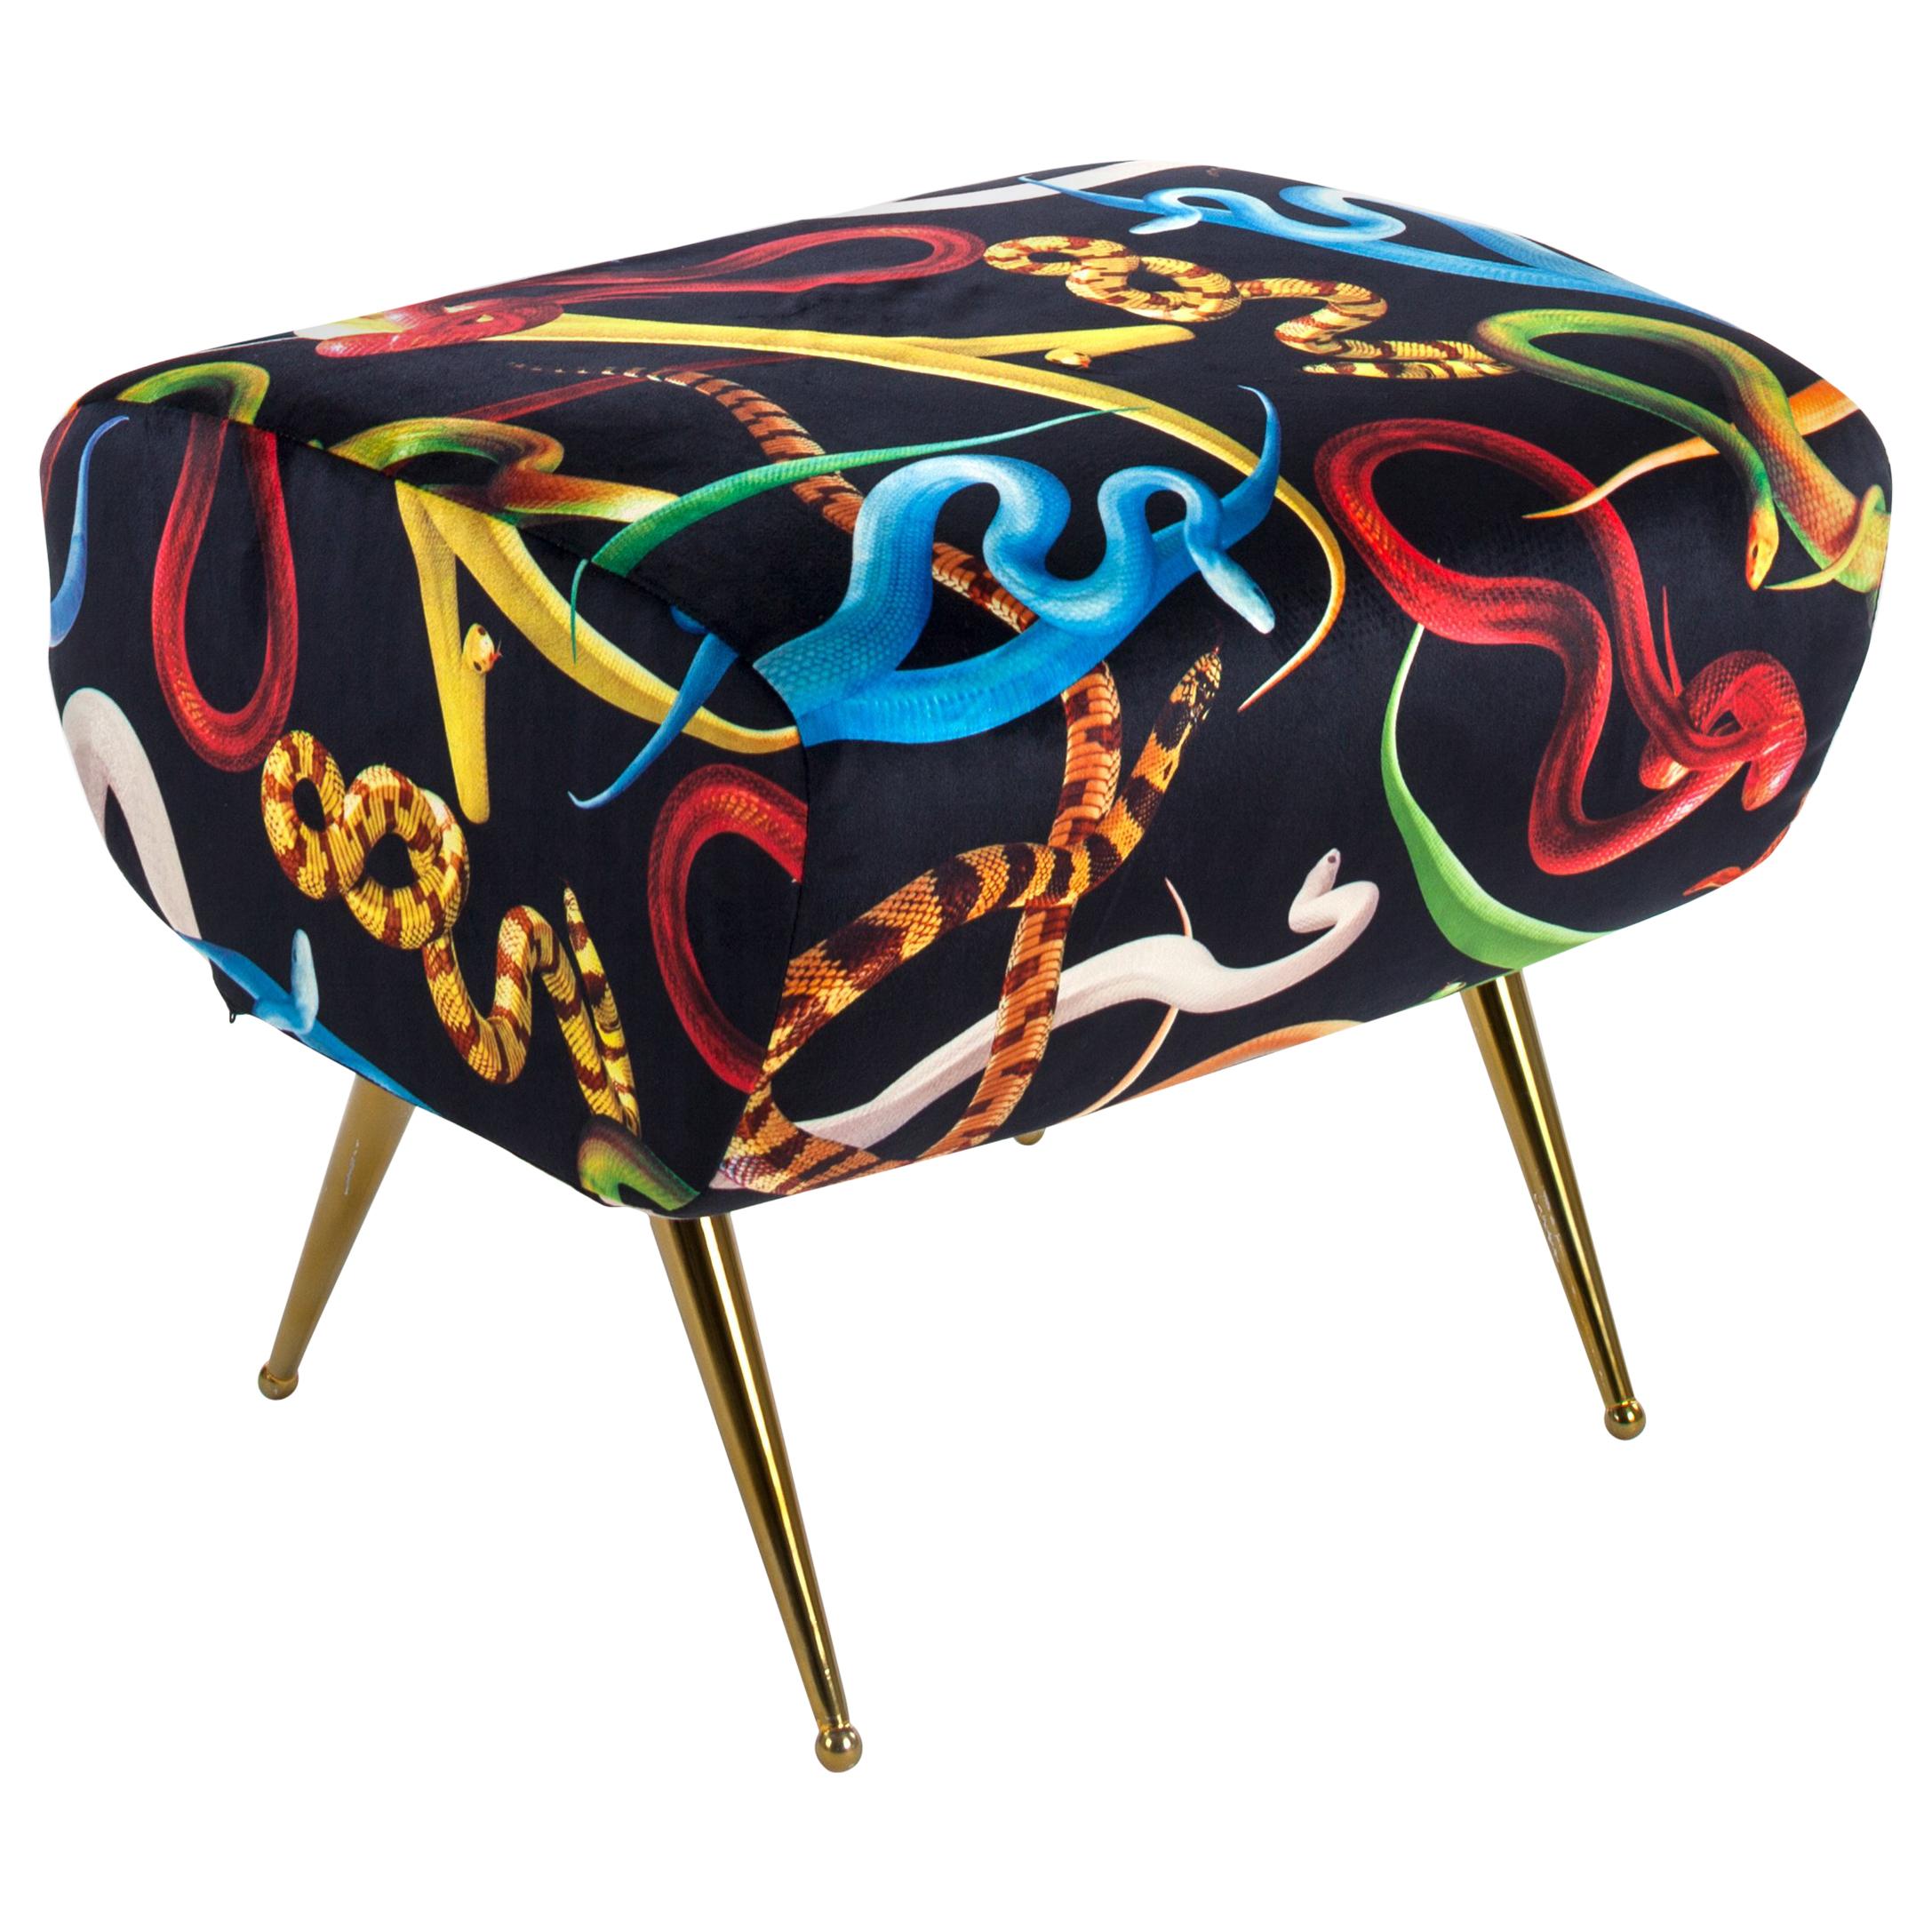 Seletti "Snakes" Pouf by Toiletpaper For Sale